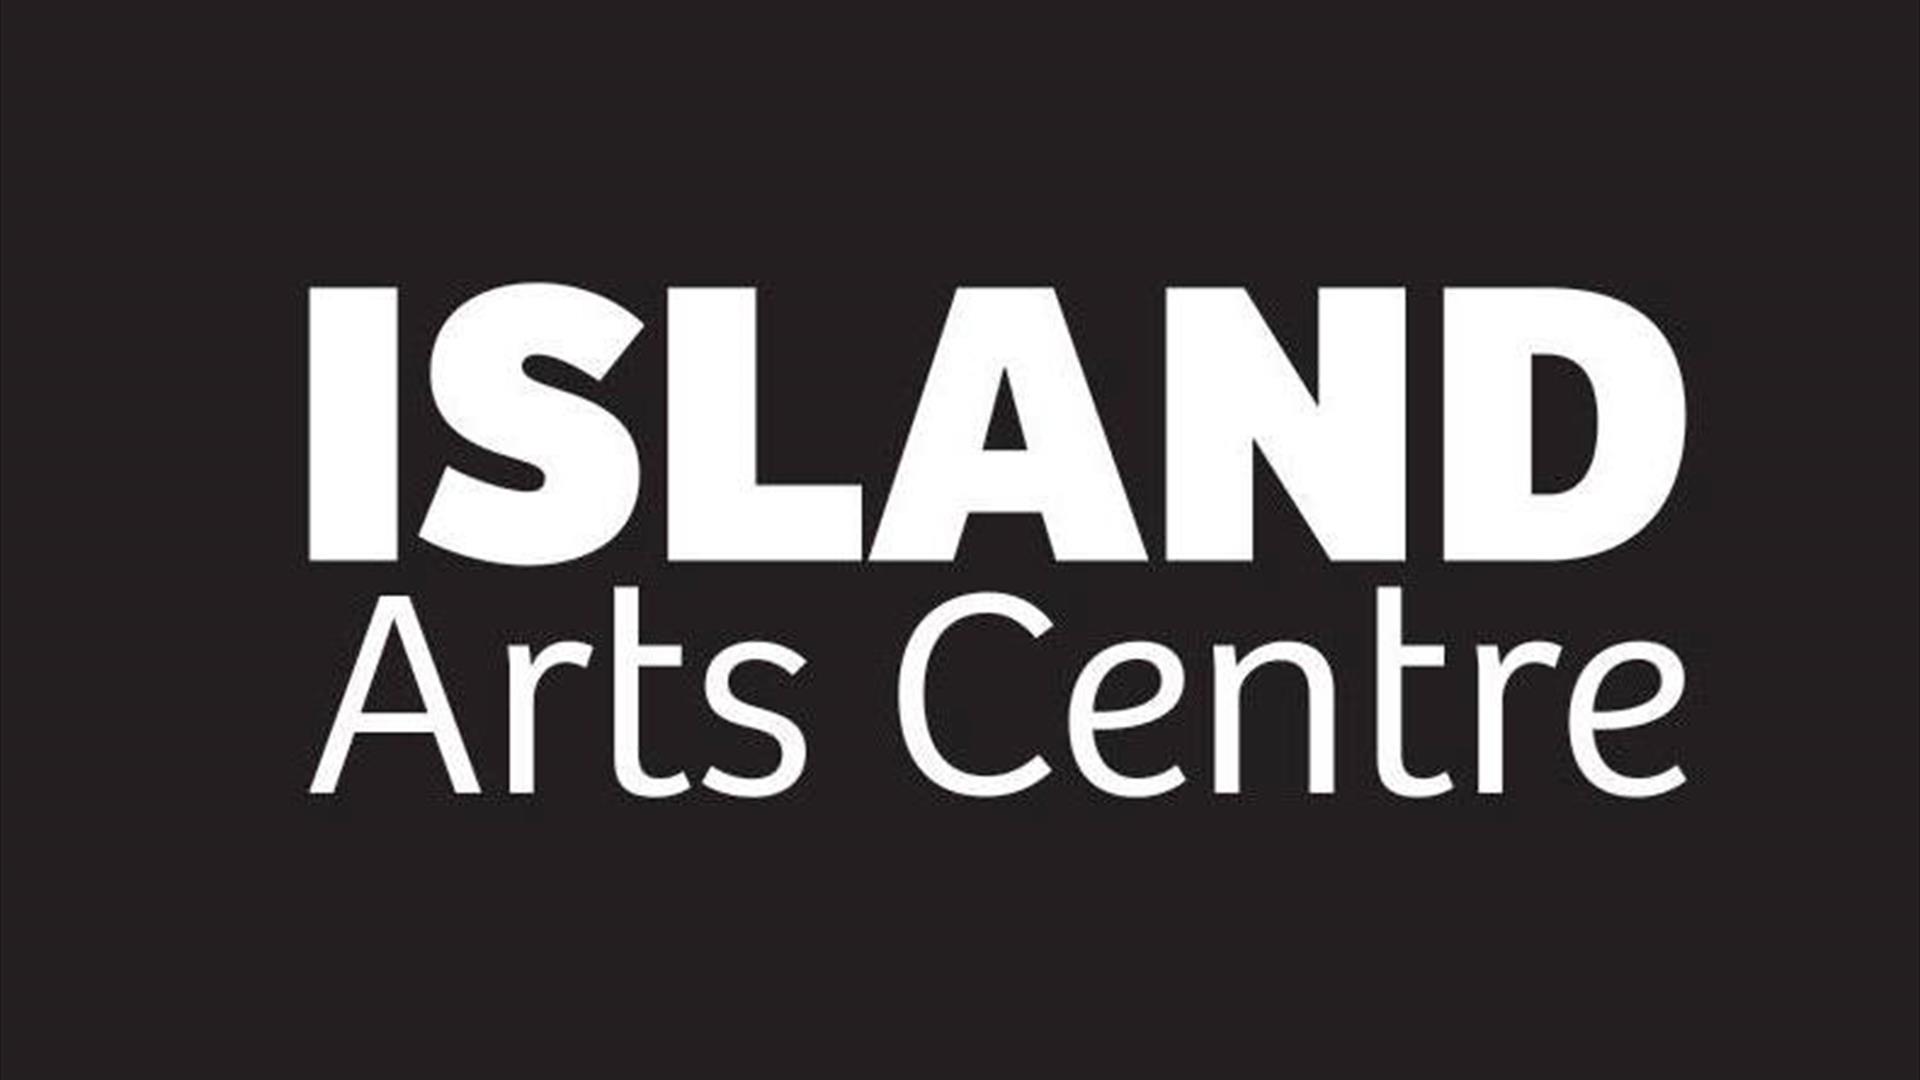 Image is the black and white logo of the ISLAND Arts Centre